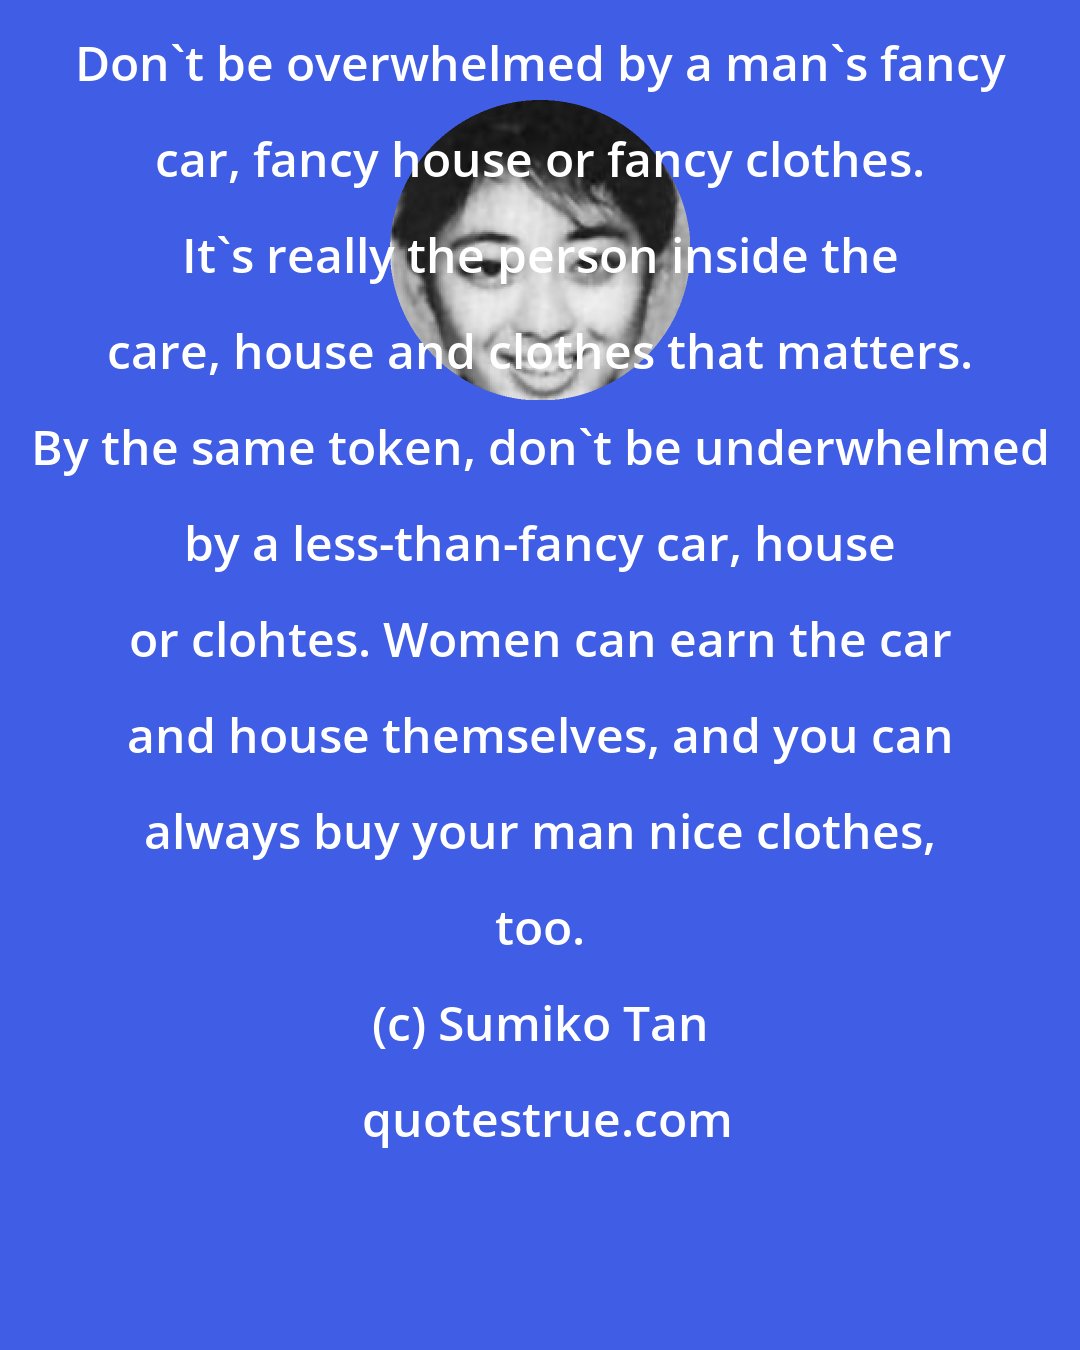 Sumiko Tan: Don't be overwhelmed by a man's fancy car, fancy house or fancy clothes. It's really the person inside the care, house and clothes that matters. By the same token, don't be underwhelmed by a less-than-fancy car, house or clohtes. Women can earn the car and house themselves, and you can always buy your man nice clothes, too.